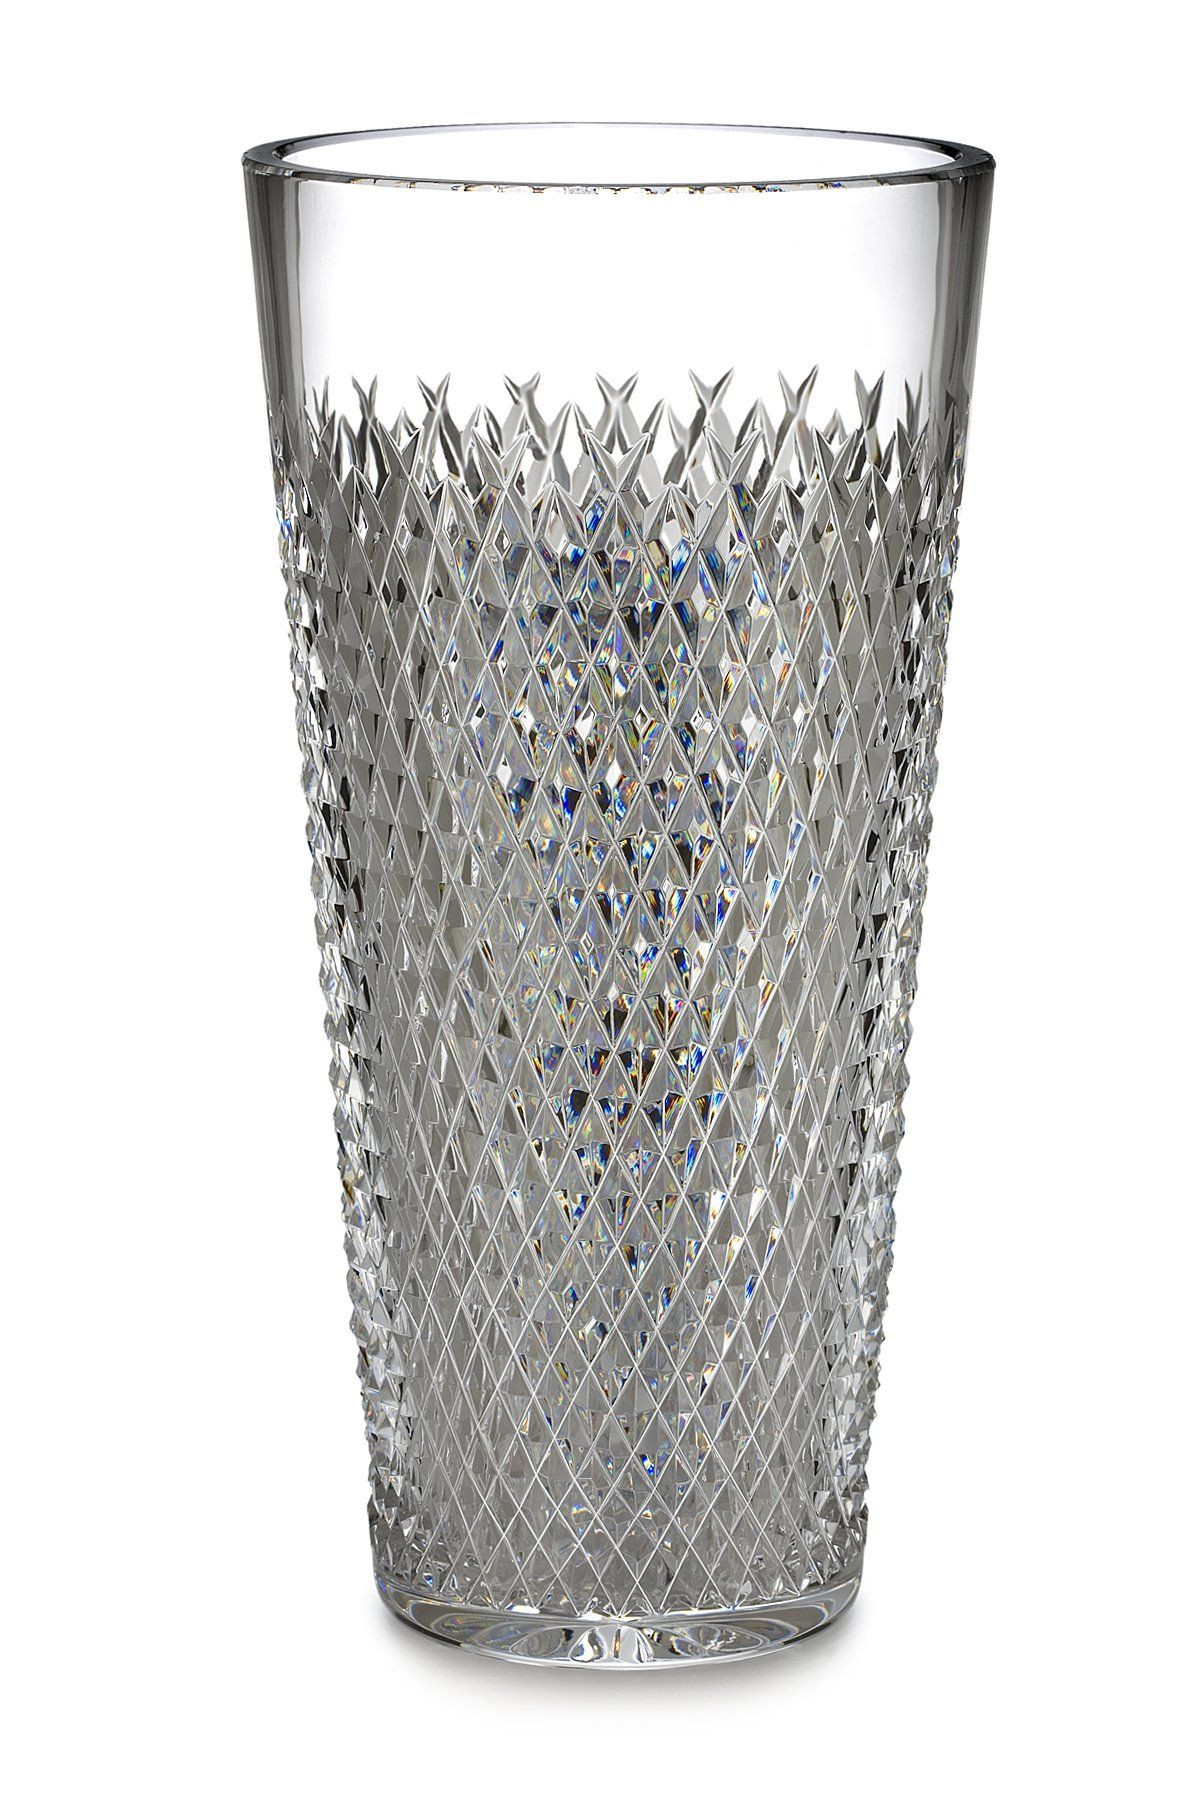 27 Lovable Marquis 11 Crystal Vase 2024 free download marquis 11 crystal vase of waterford alana 12 inch vase 12 inch vase crystal alana vases for waterford alana 12 inch vase 12 inch vase crystal alana